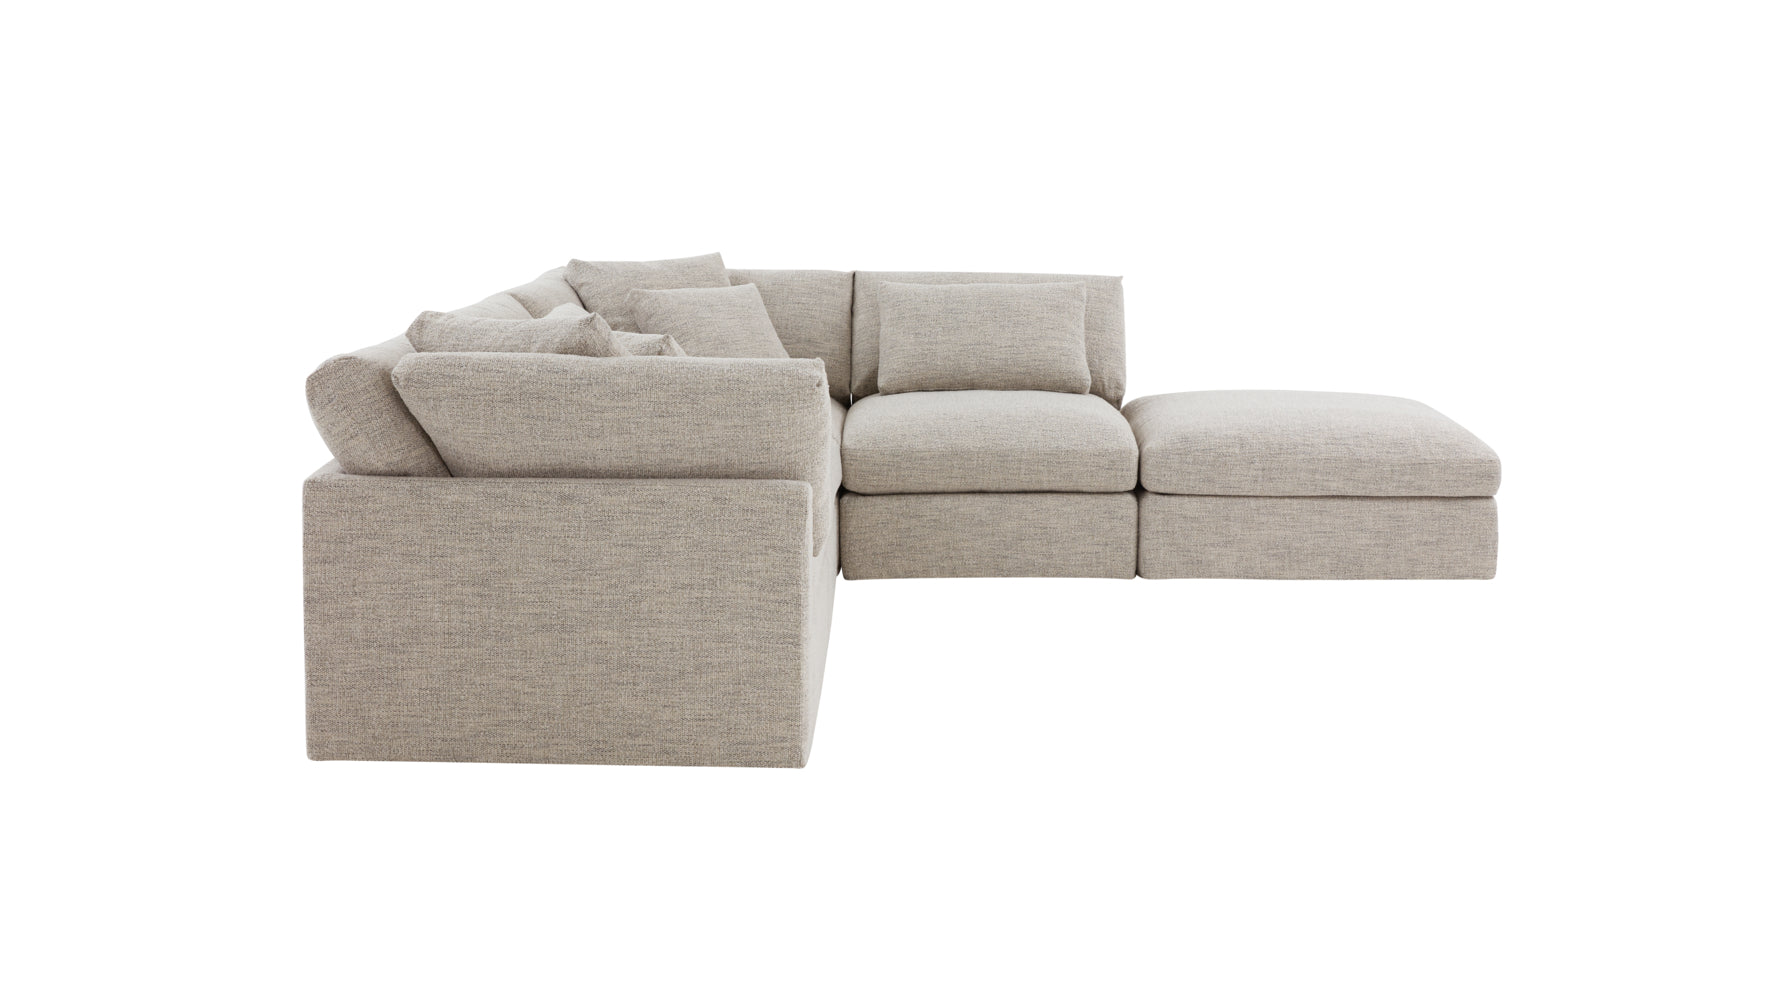 Get Together™ 5-Piece Modular Sectional, Large, Oatmeal - Image 5